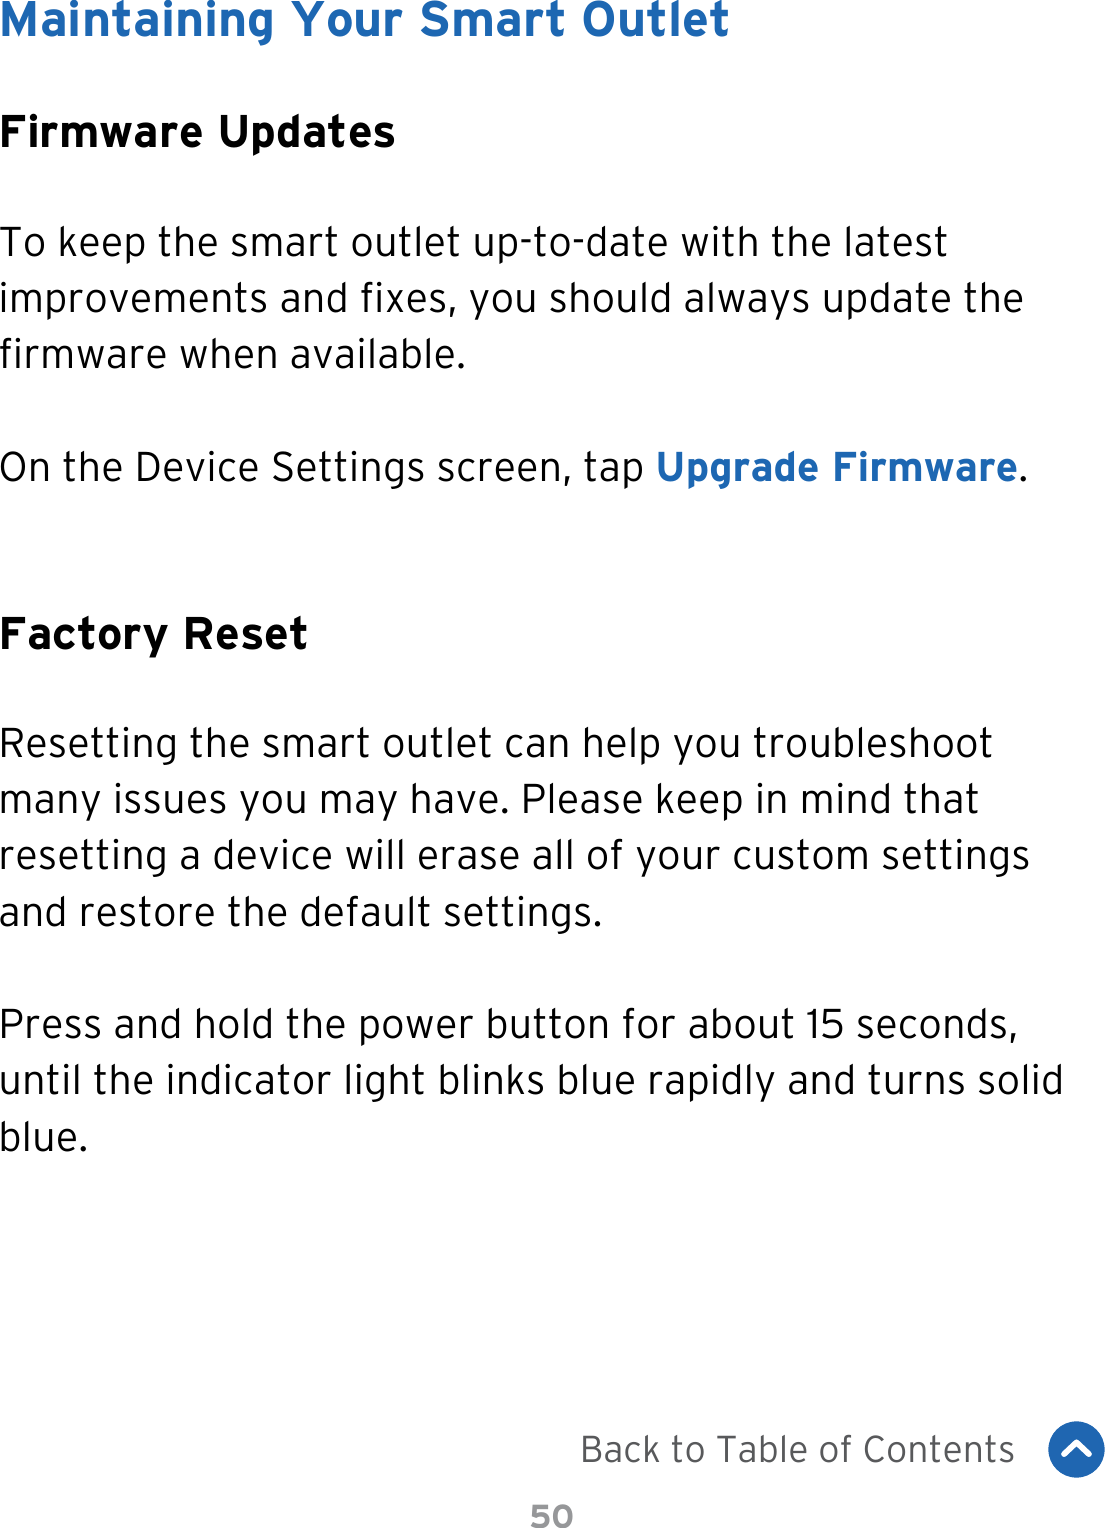 50Maintaining Your Smart OutletFirmware UpdatesFactory ResetTo keep the smart outlet up-to-date with the latest improvements and xes, you should always update the rmware when available.On the Device Settings screen, tap Upgrade Firmware.Resetting the smart outlet can help you troubleshoot many issues you may have. Please keep in mind that resetting a device will erase all of your custom settings and restore the default settings.Press and hold the power button for about 15 seconds, until the indicator light blinks blue rapidly and turns solid blue.Back to Table of Contents